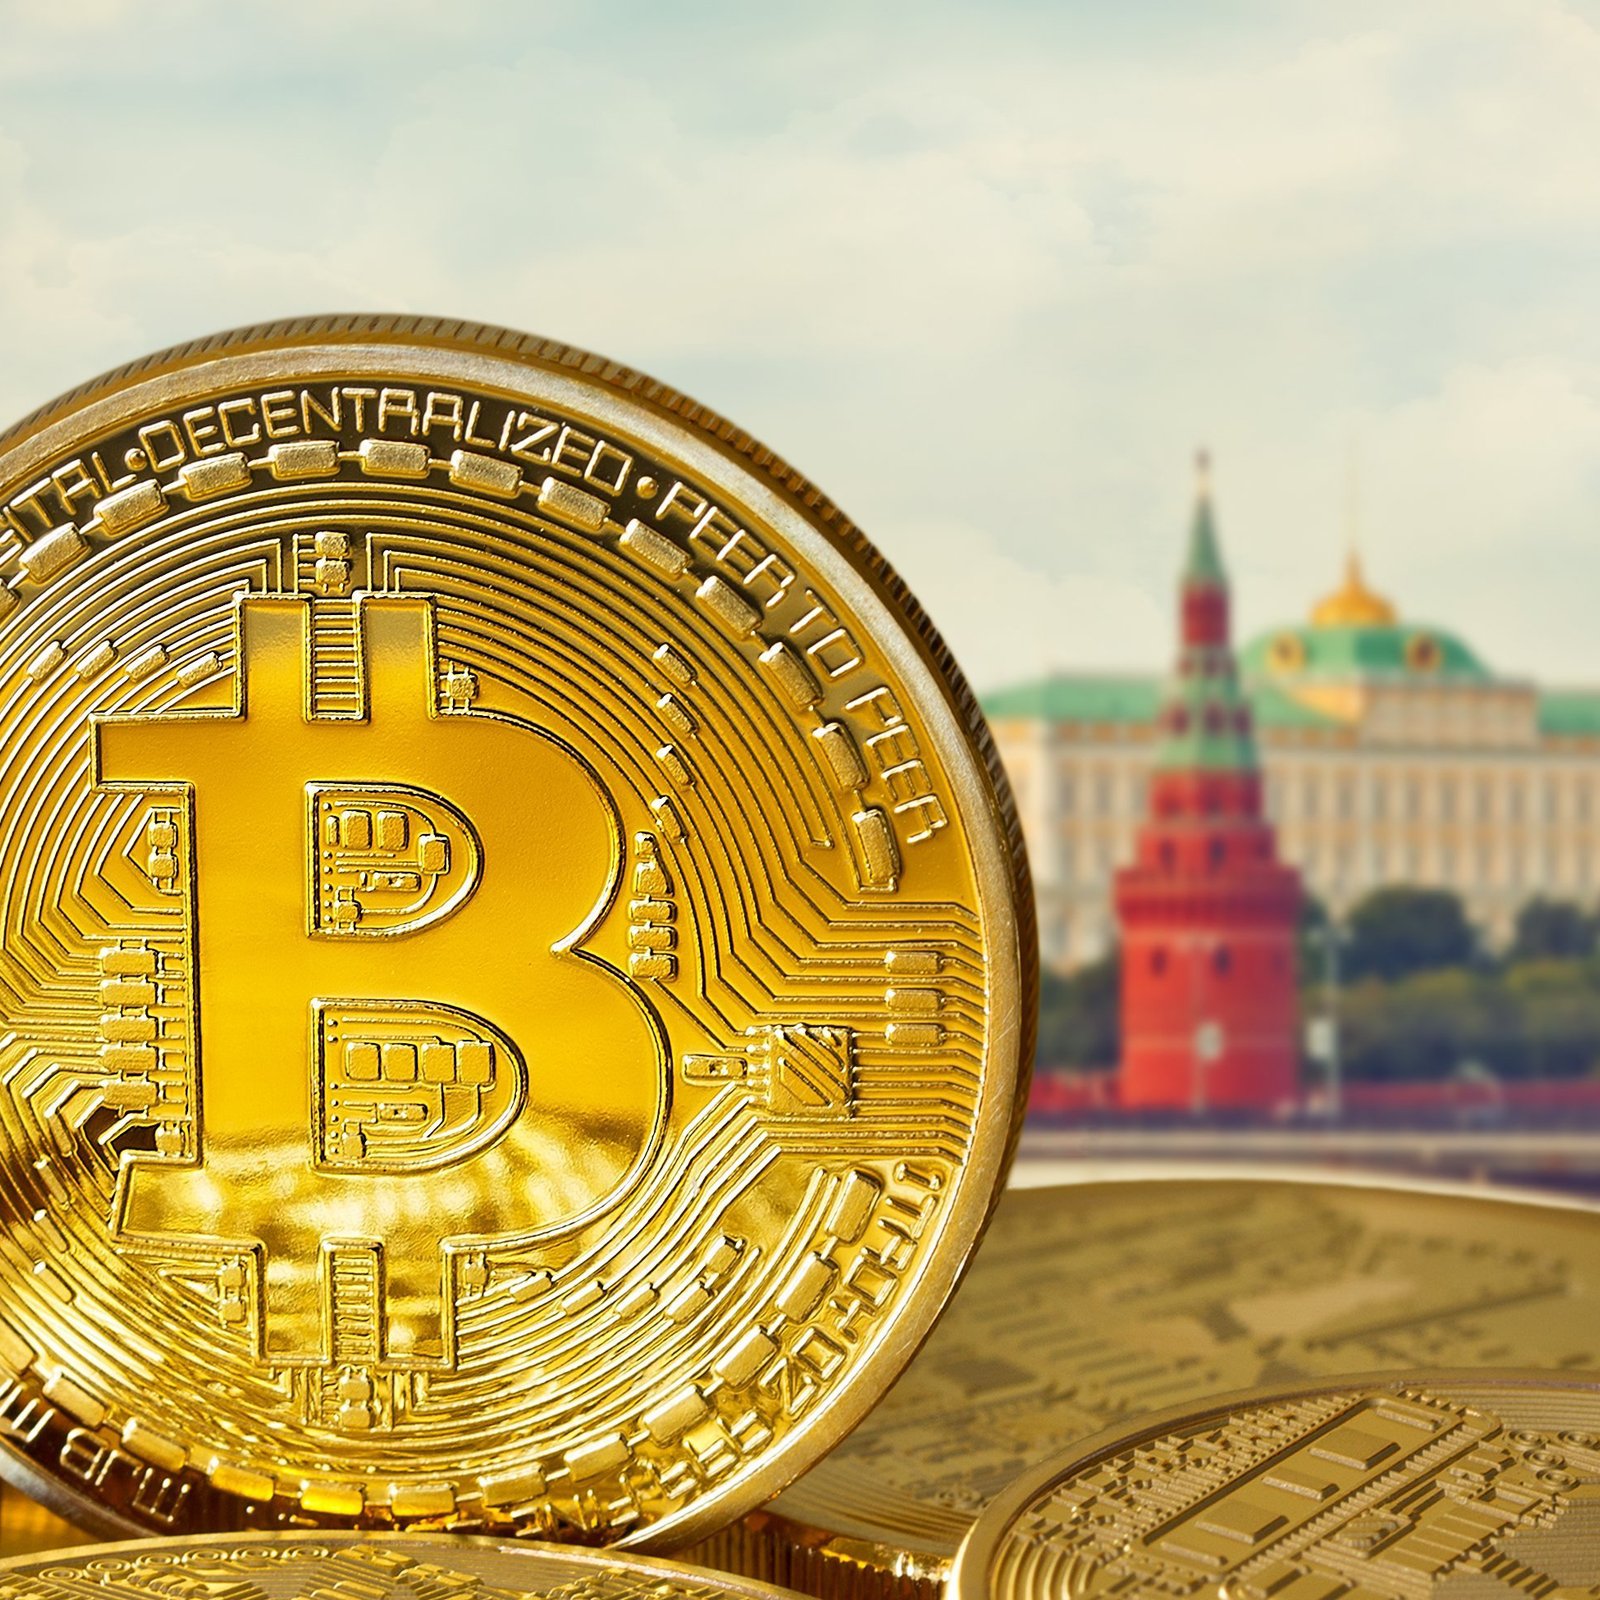 Cryptocurrency is Property in Russia, Justice Minister Confirms